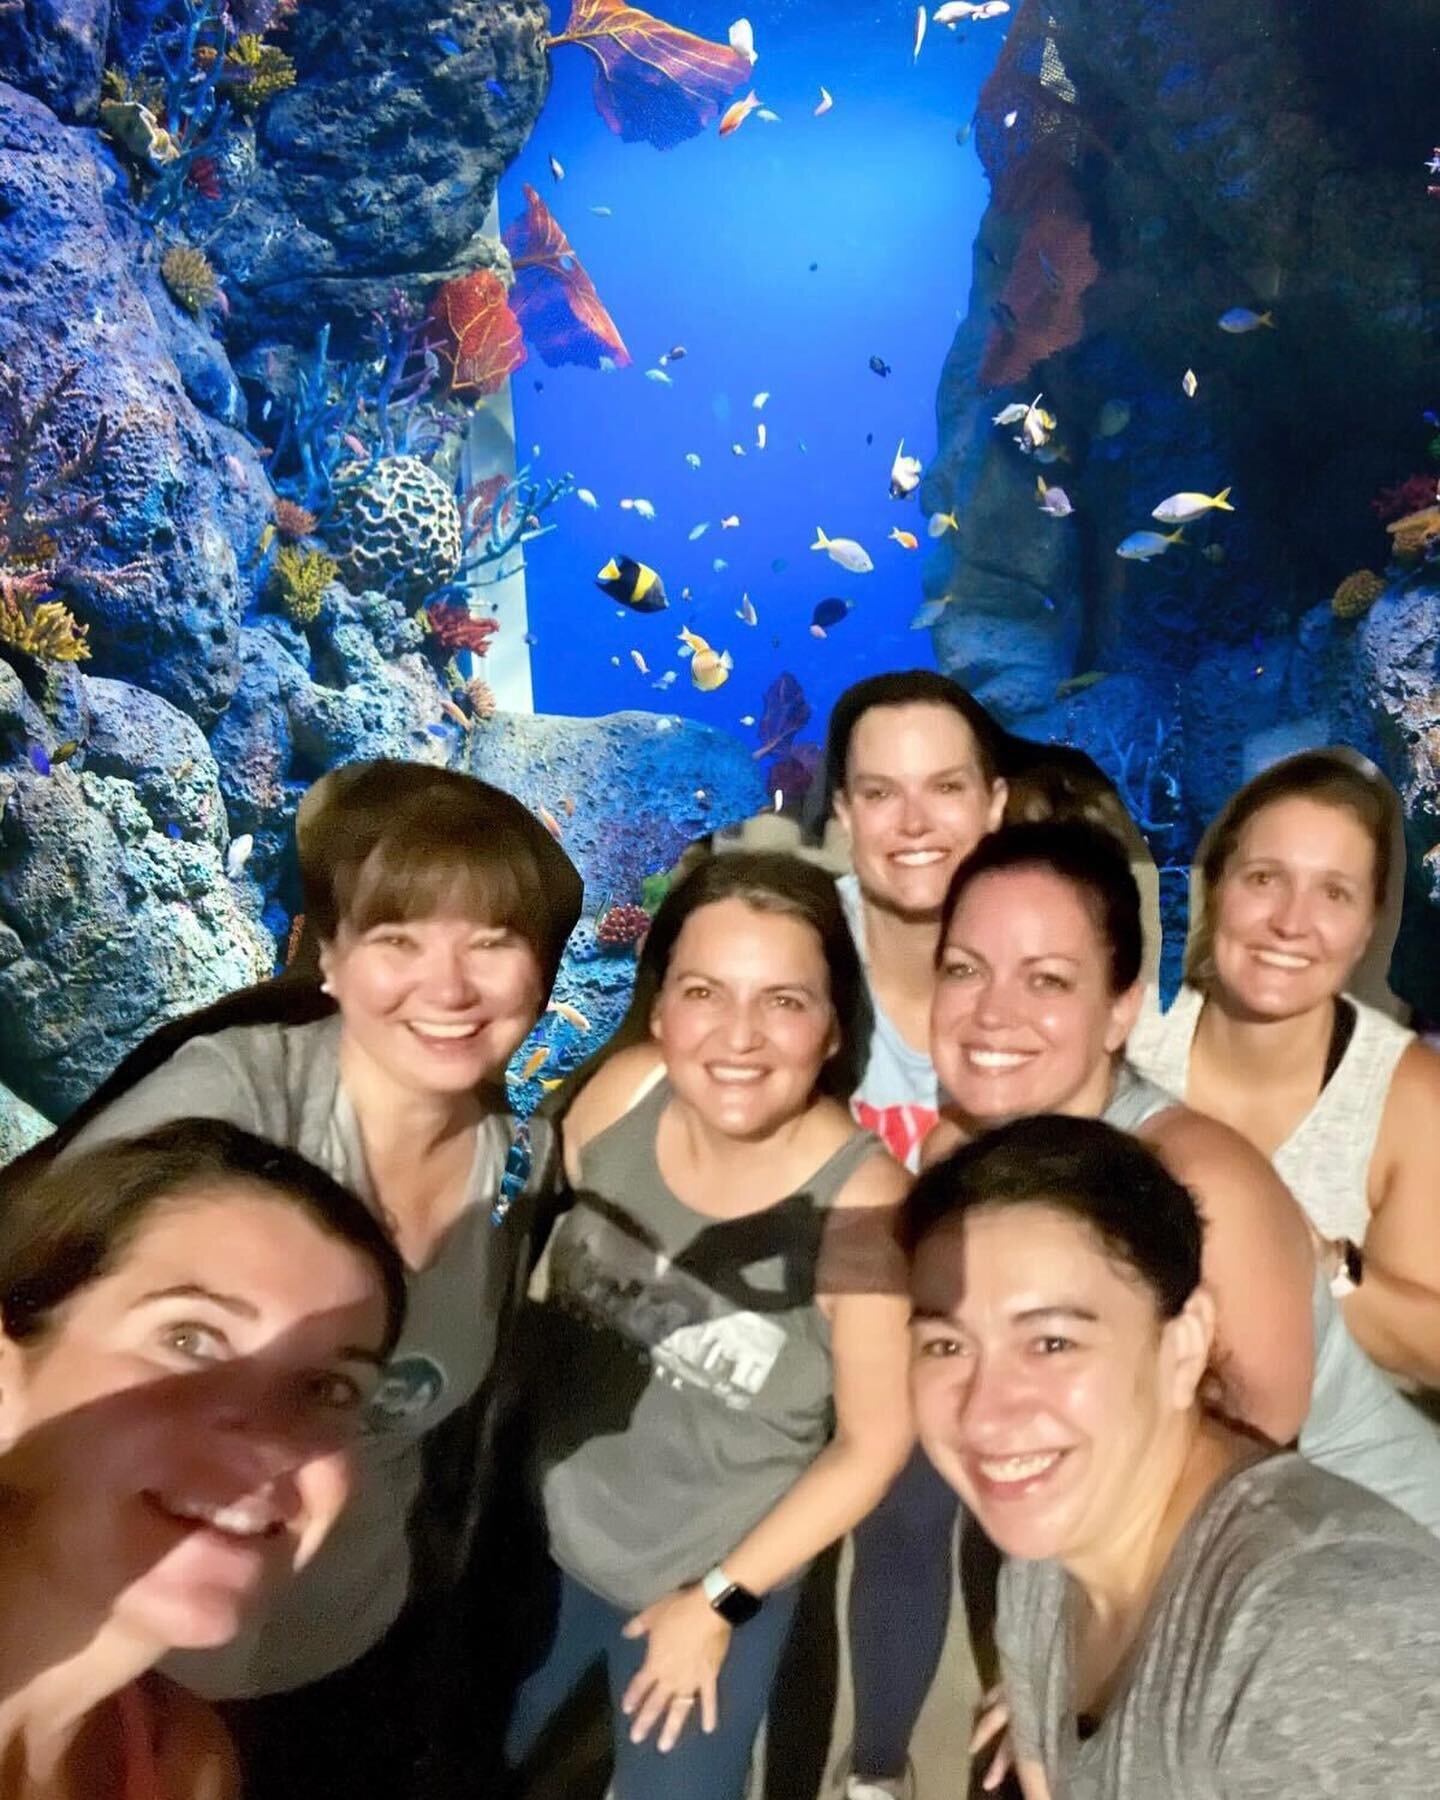 Each day brings new possibilities our way. This morning, eight ladies prepared through stretching, strength and relaxation at The Falls. We welcomed FNG, Coral. 🐠🐡🐟